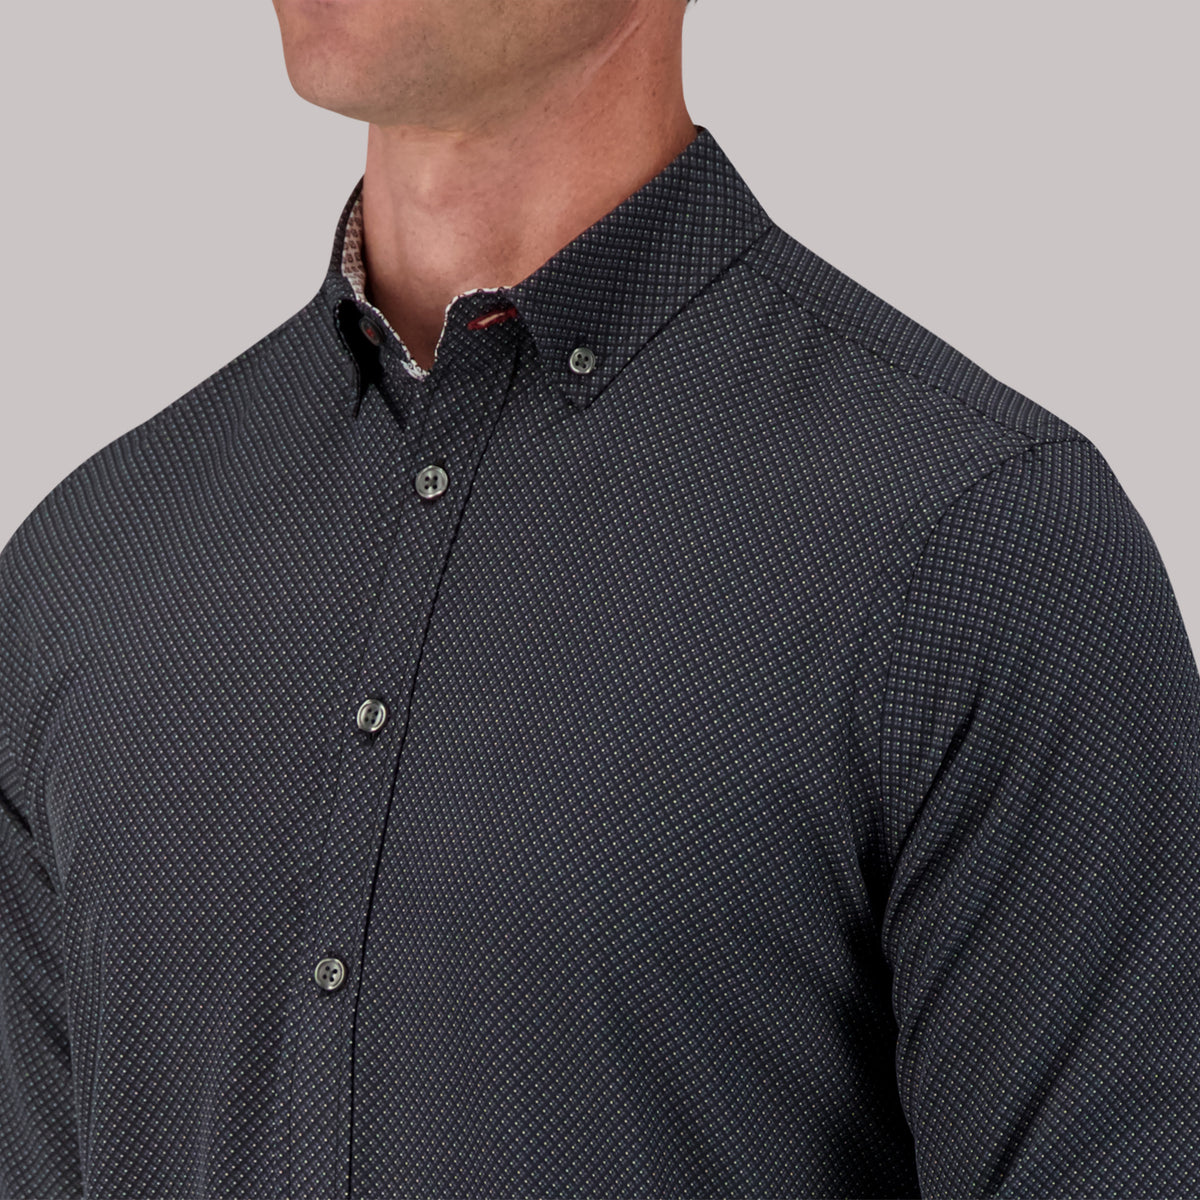 Model Front Close Up View of Long Sleeve 4-Way Sport Shirt with Geo Dots Print in Black